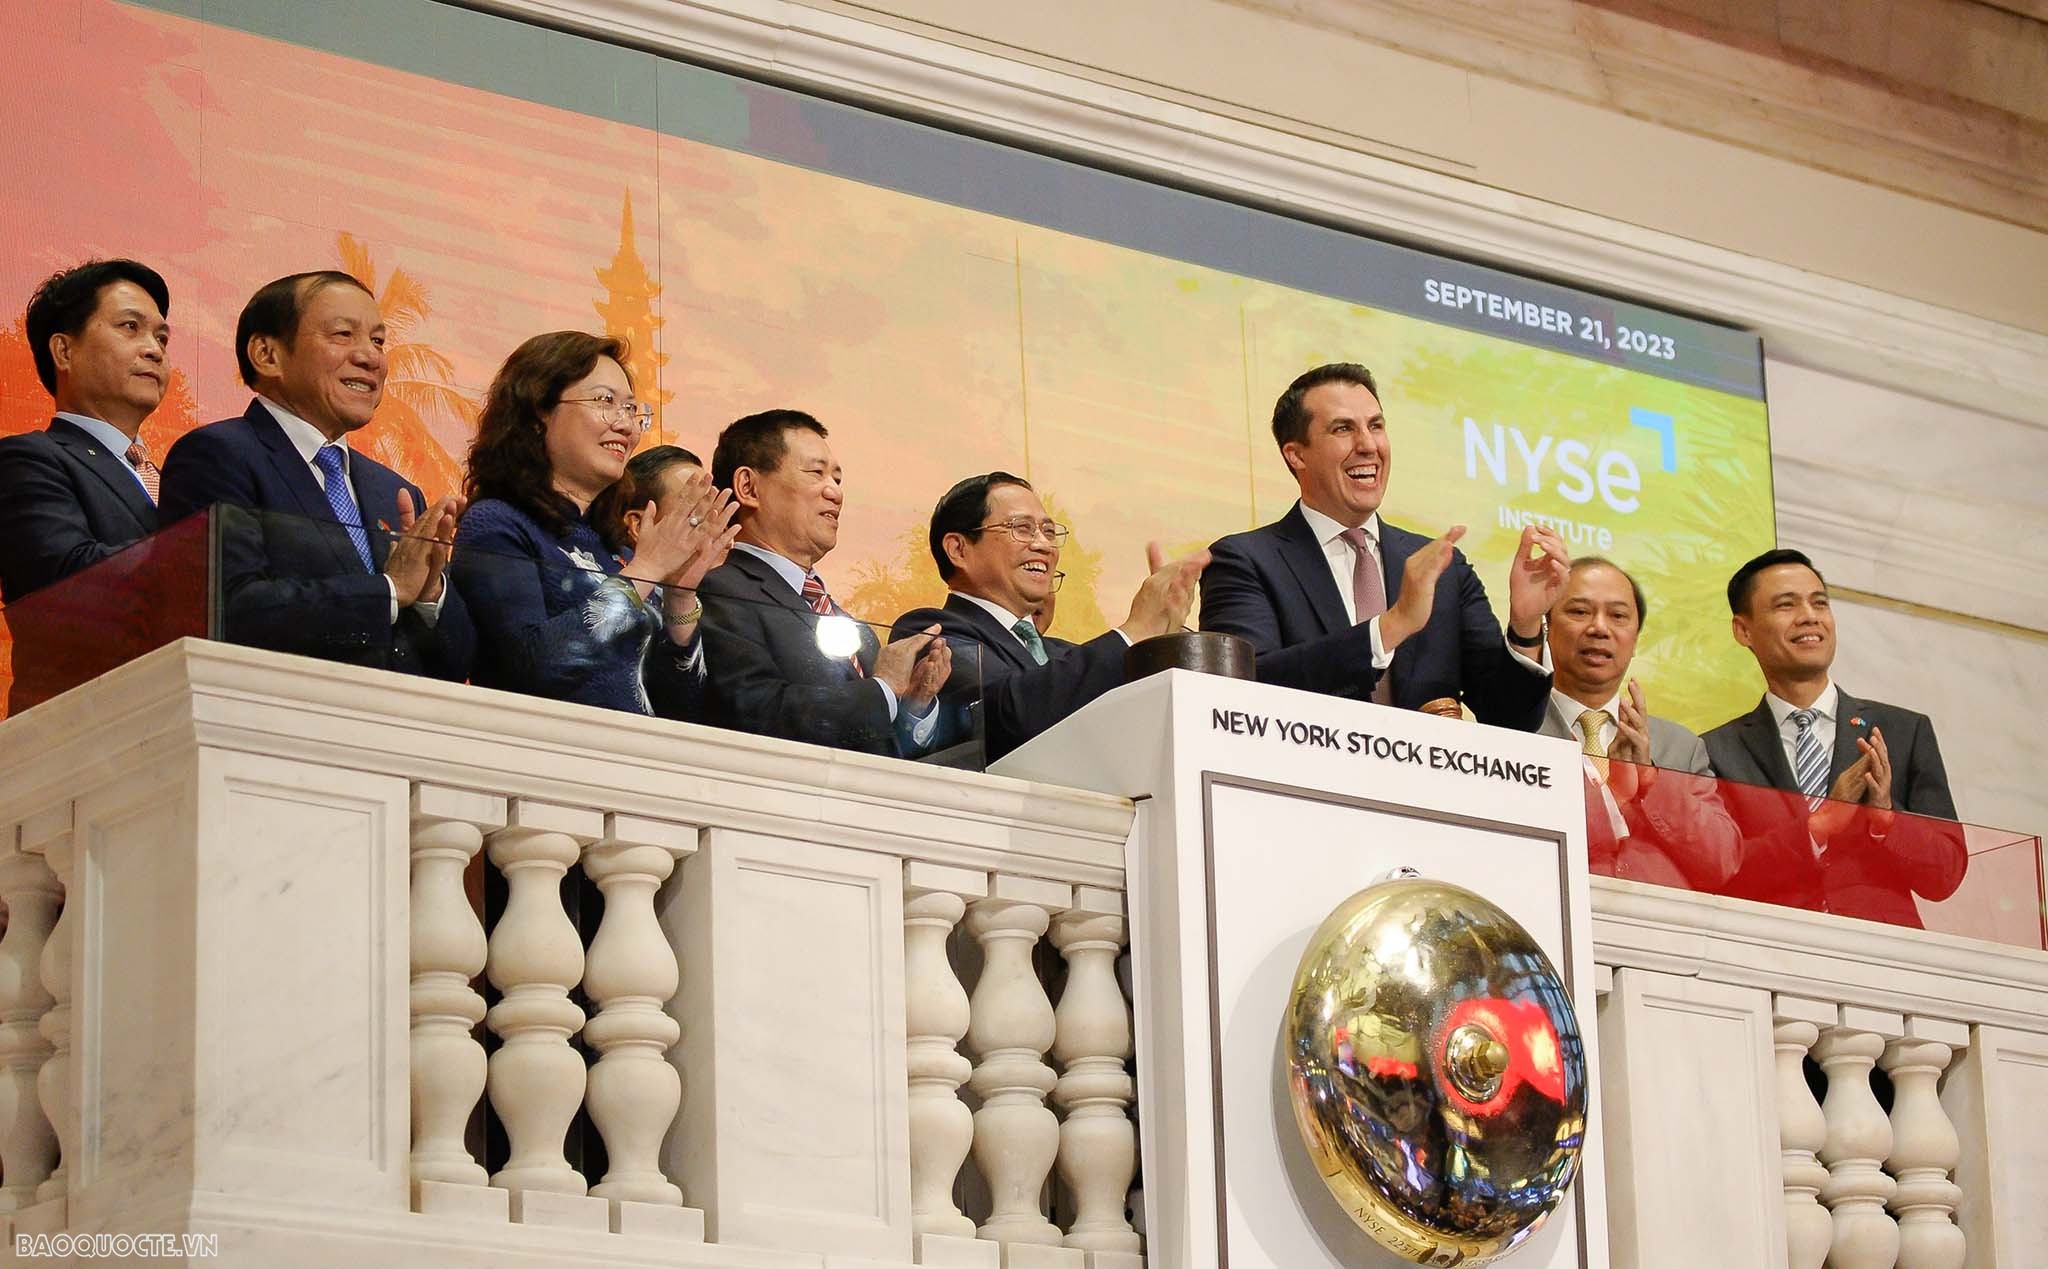 PM Pham Minh Chinh rang the bell to open NYSE trading session